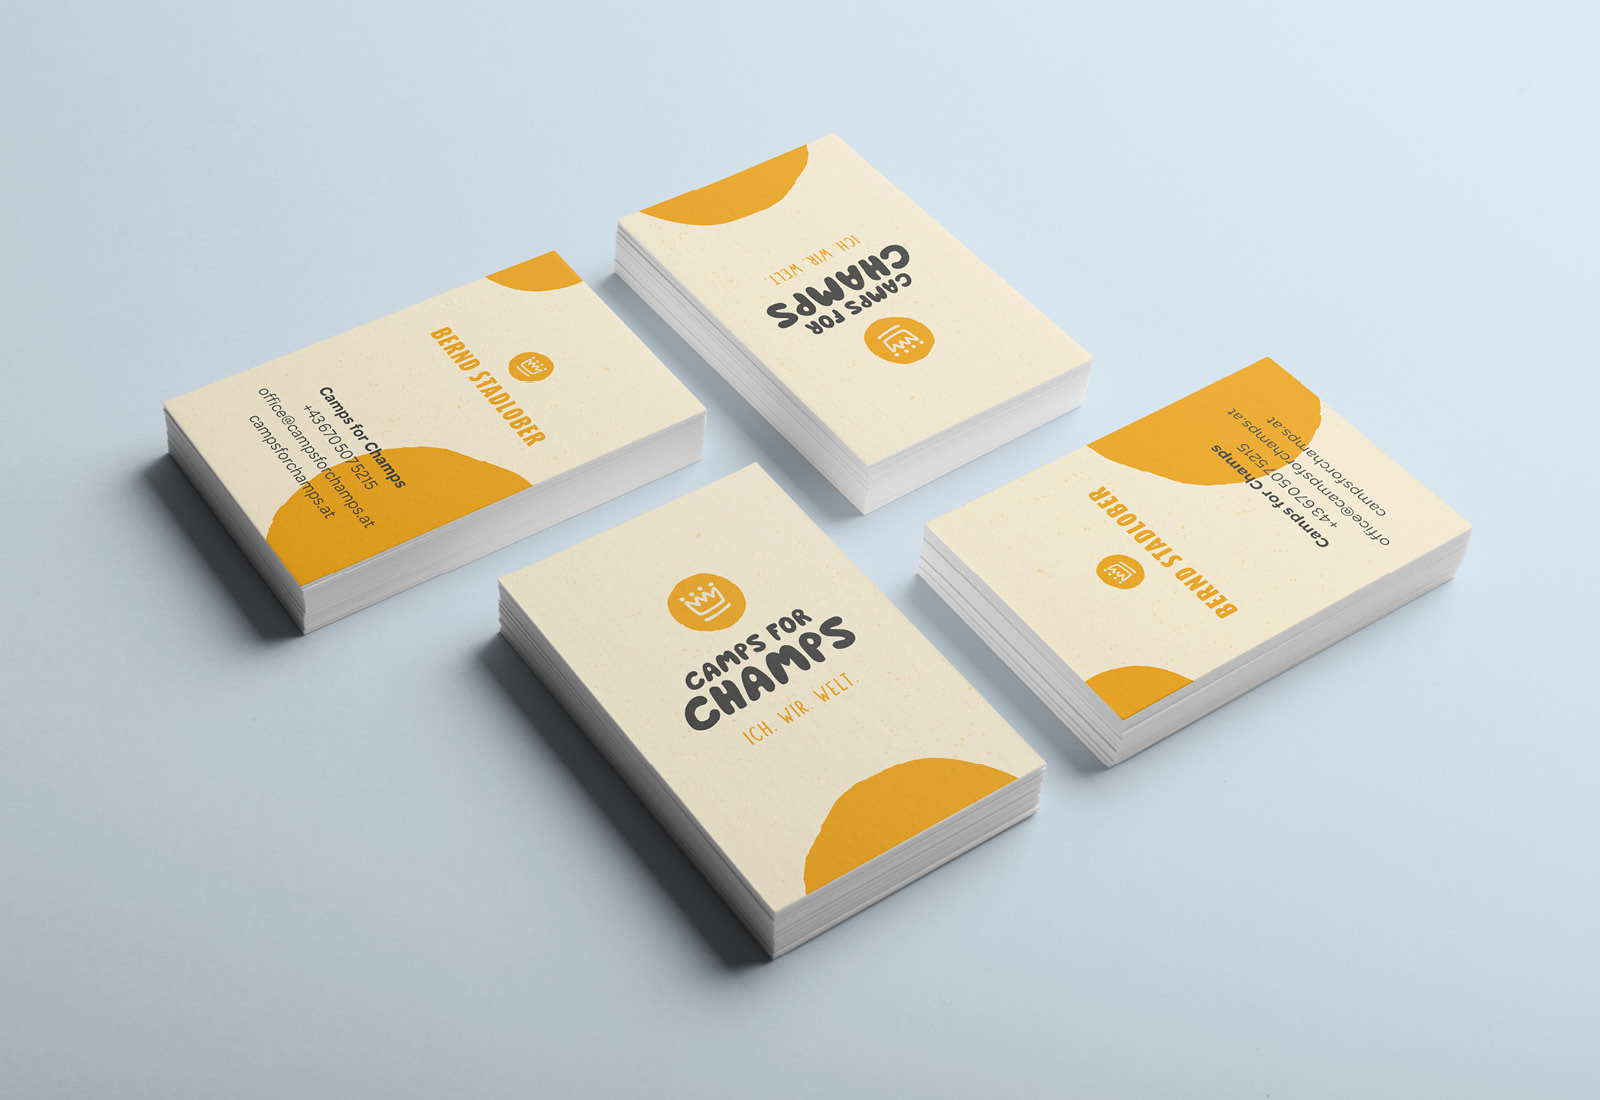 A set of business cards with vibrant yellow and orange designs.